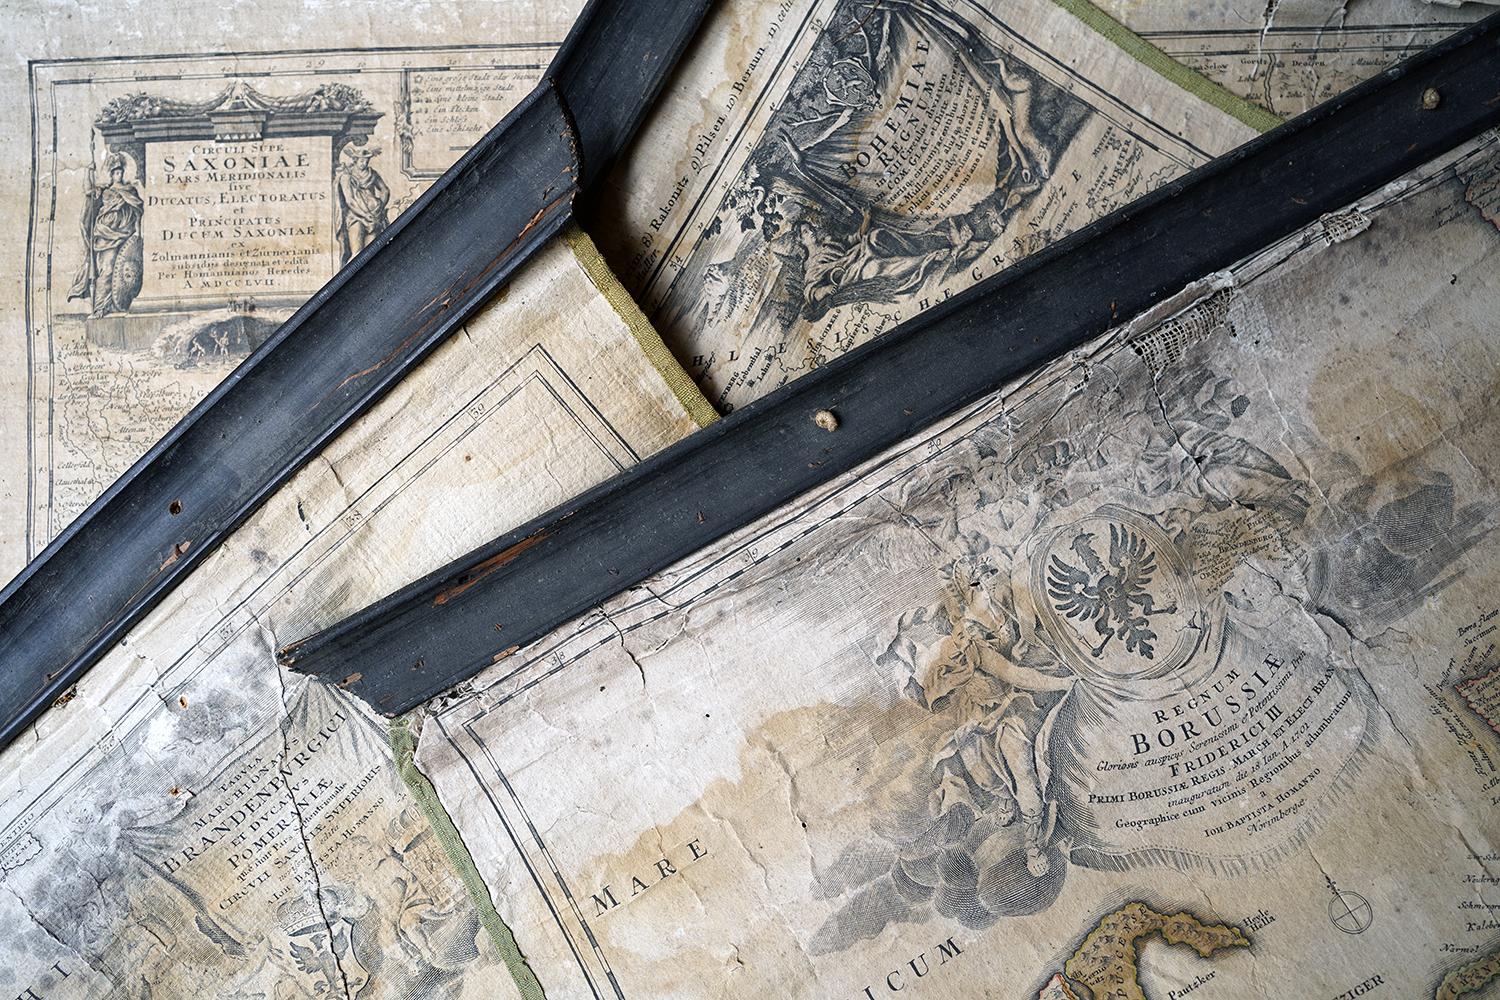 The hand-coloured maps in as found attic condition, each with their original ebonised pine rods for scrolling and lime green borders, in beautifully faded order showing various regions from Bohemia, Saxony and the Baltics with beautiful illustrated